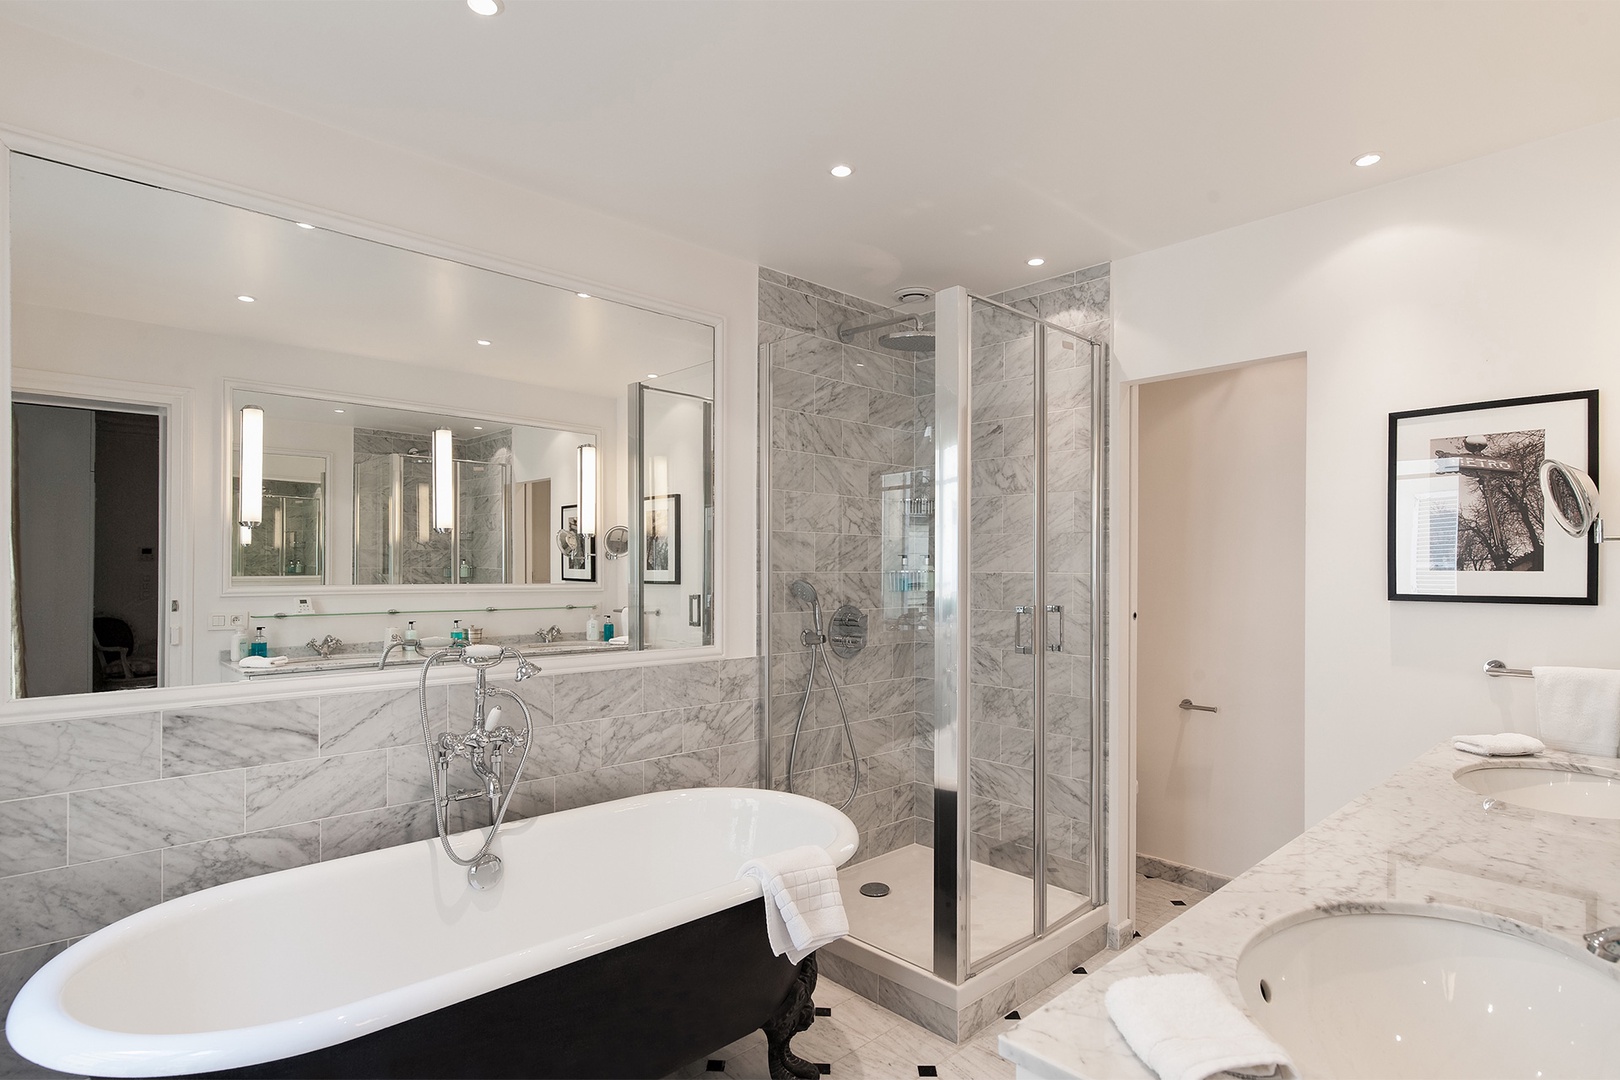 The en suite bathroom 1 is a glistening setting of gray marble.